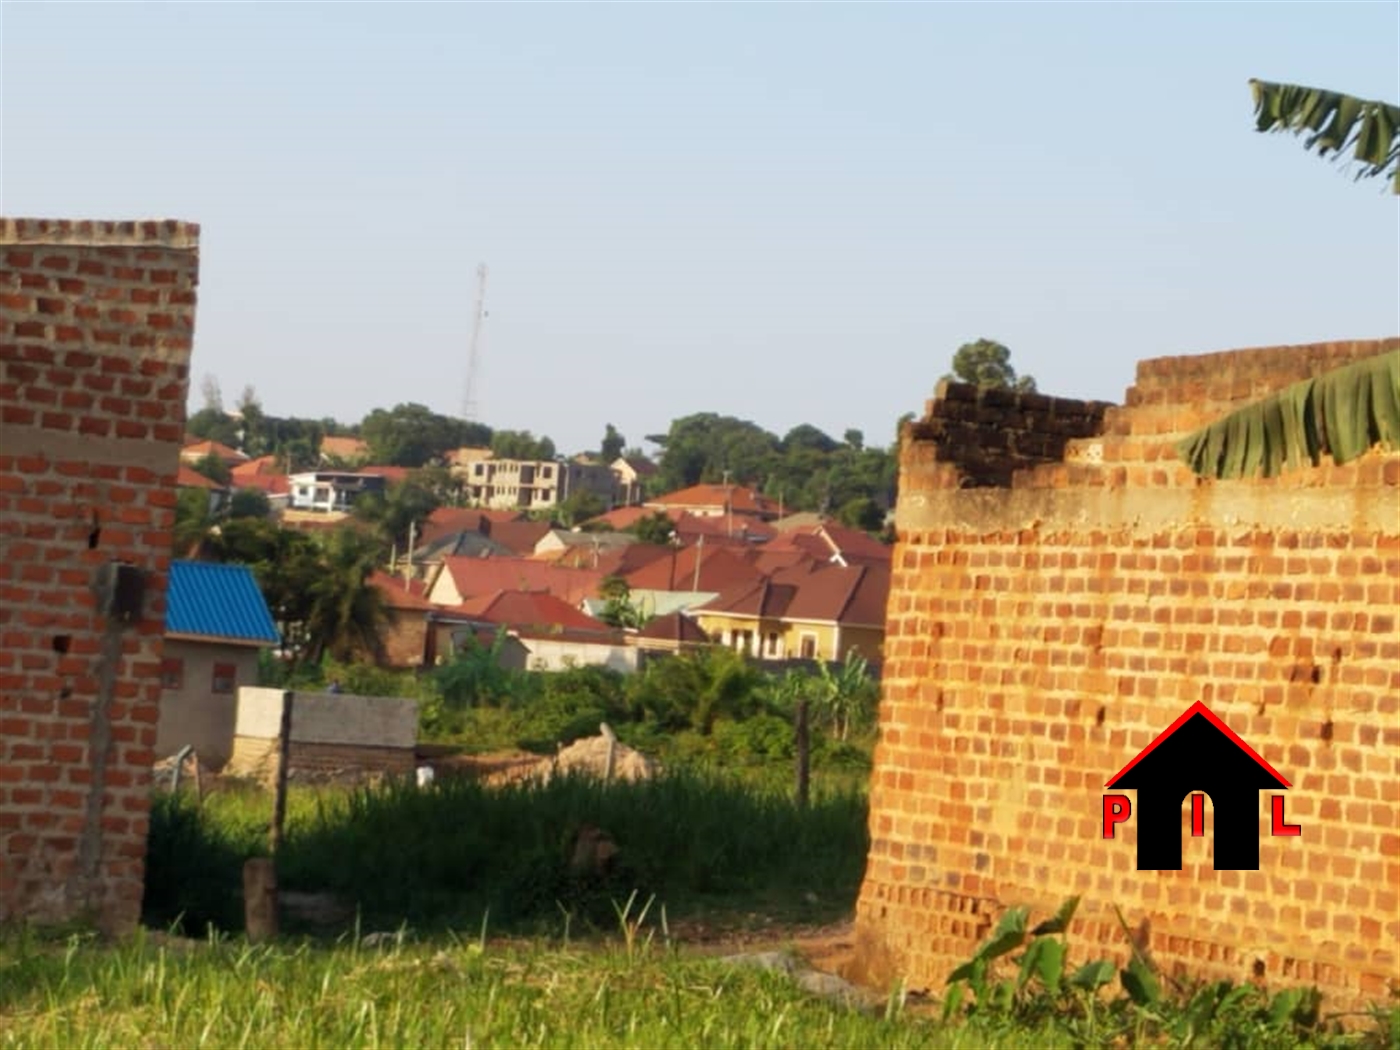 Commercial Land for sale in Kitintale Kampala